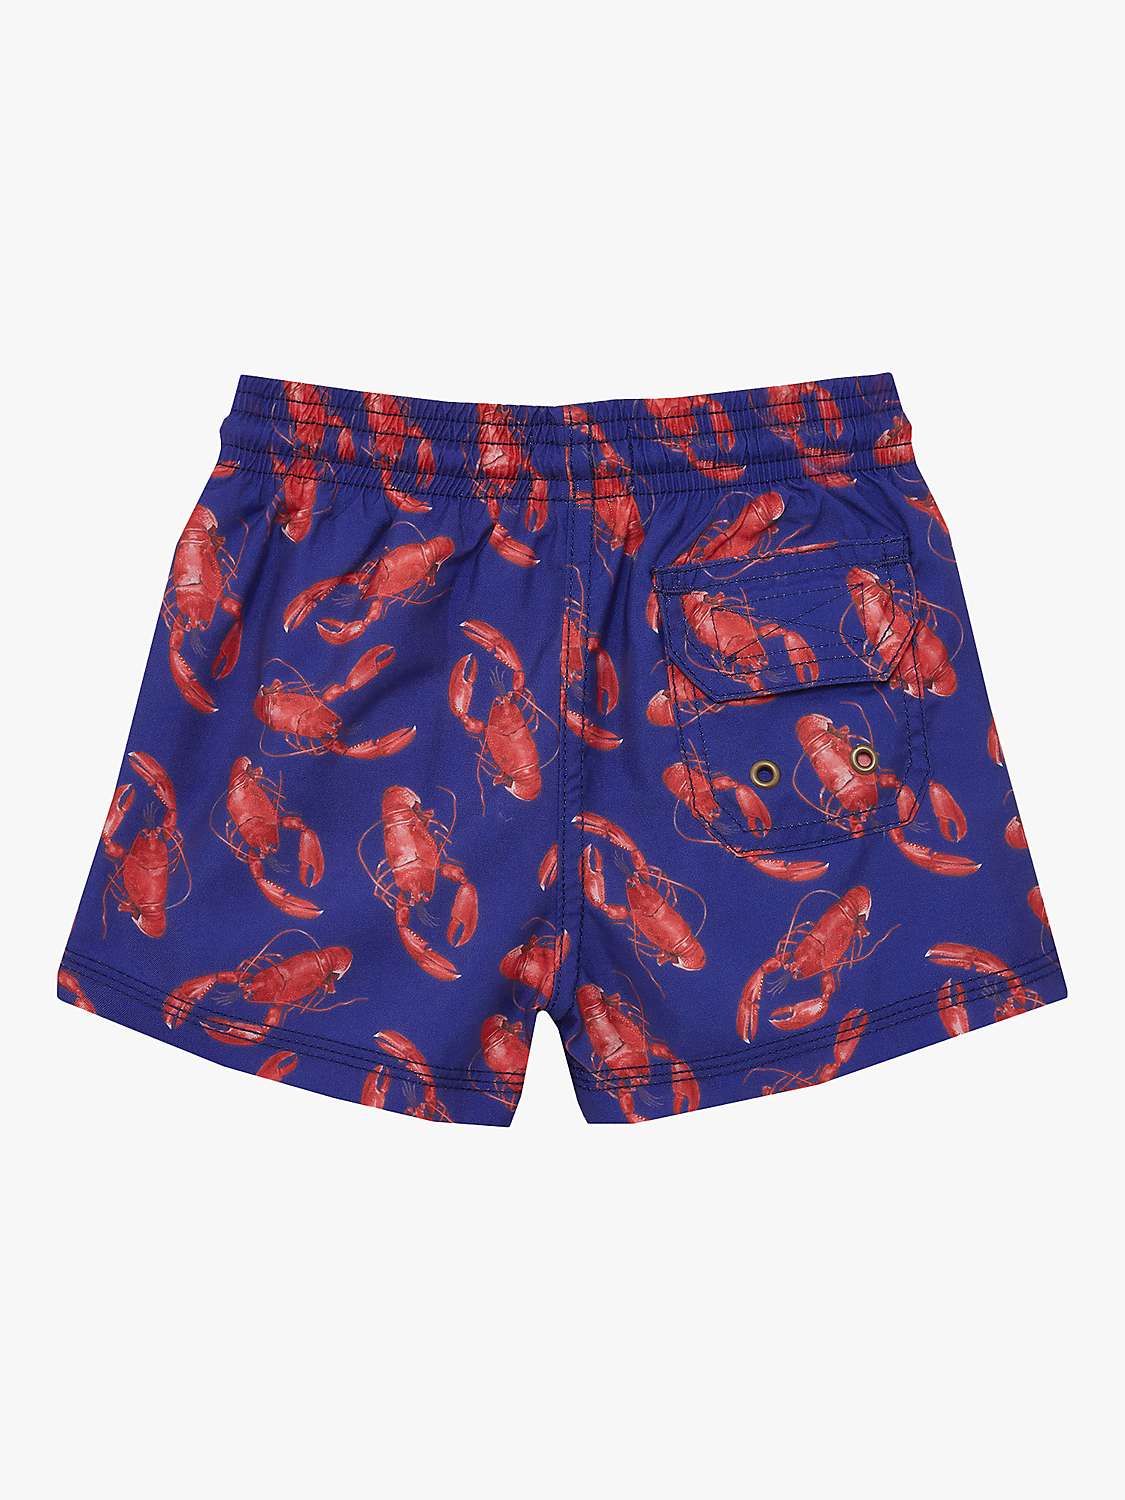 Buy Trotters Baby Lobster Swim Shorts, Navy Online at johnlewis.com